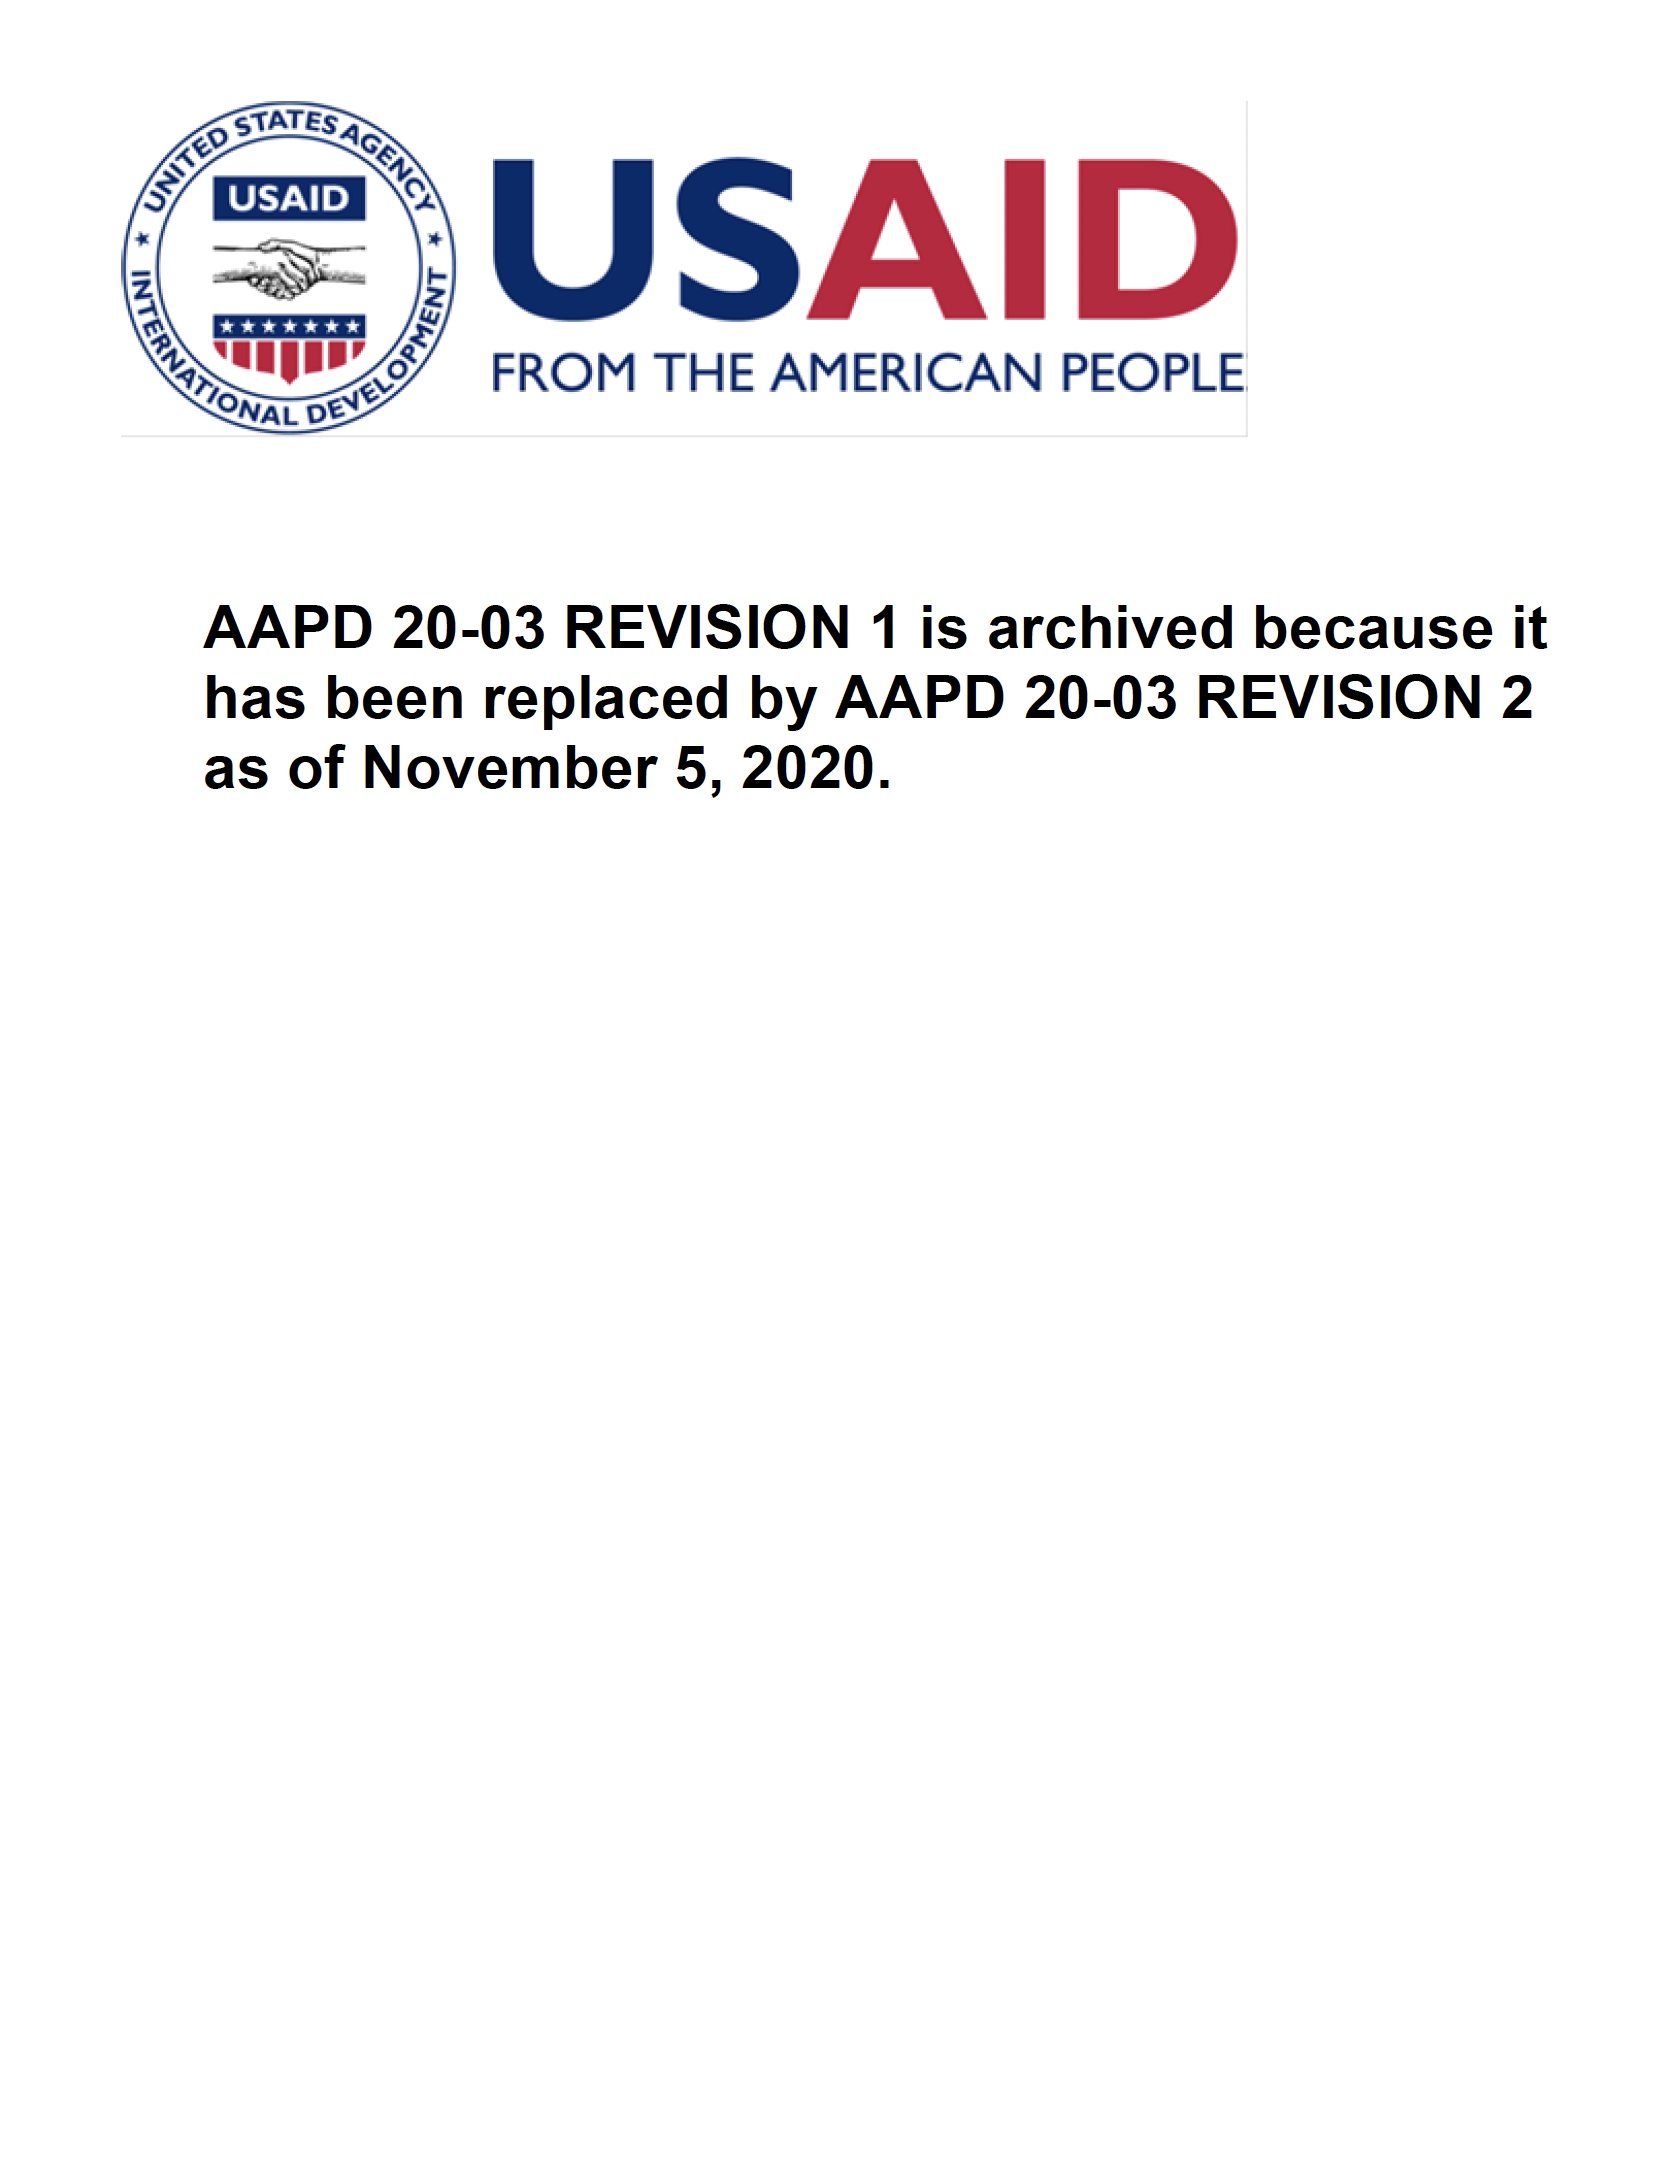 ARCHIVED AAPD 20-03 REVISION 1